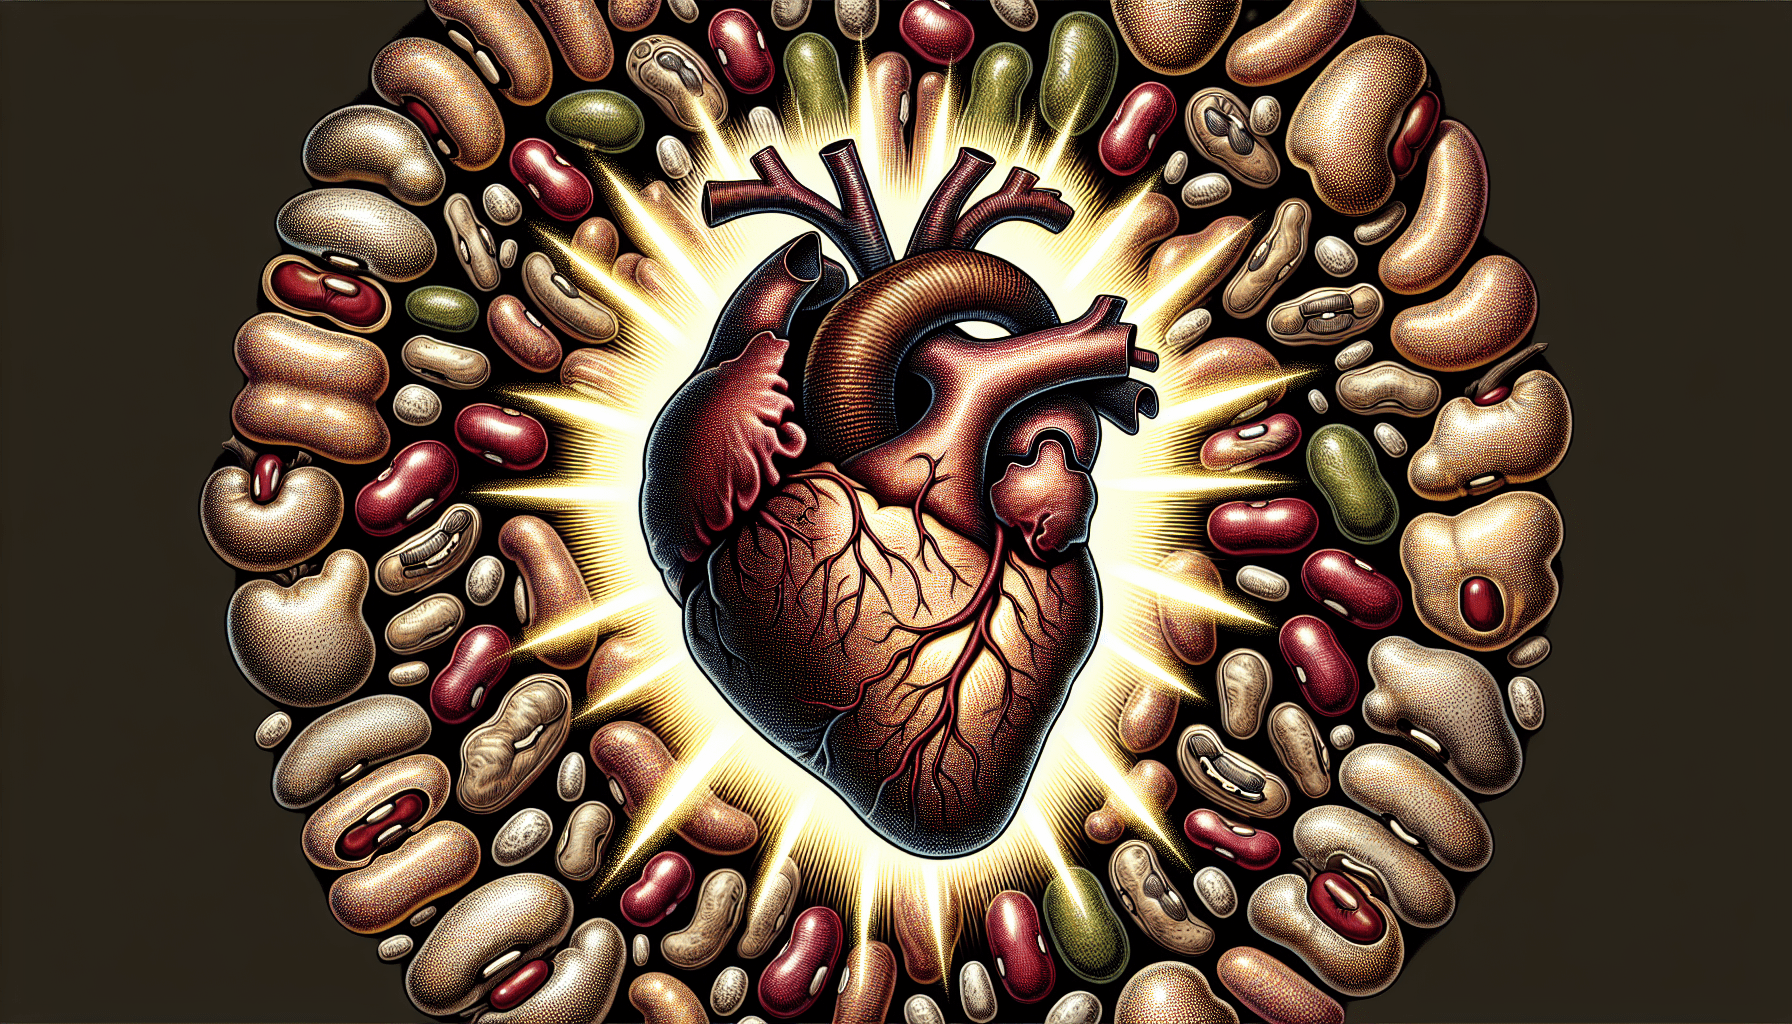 2 how do beans contribute to heart health